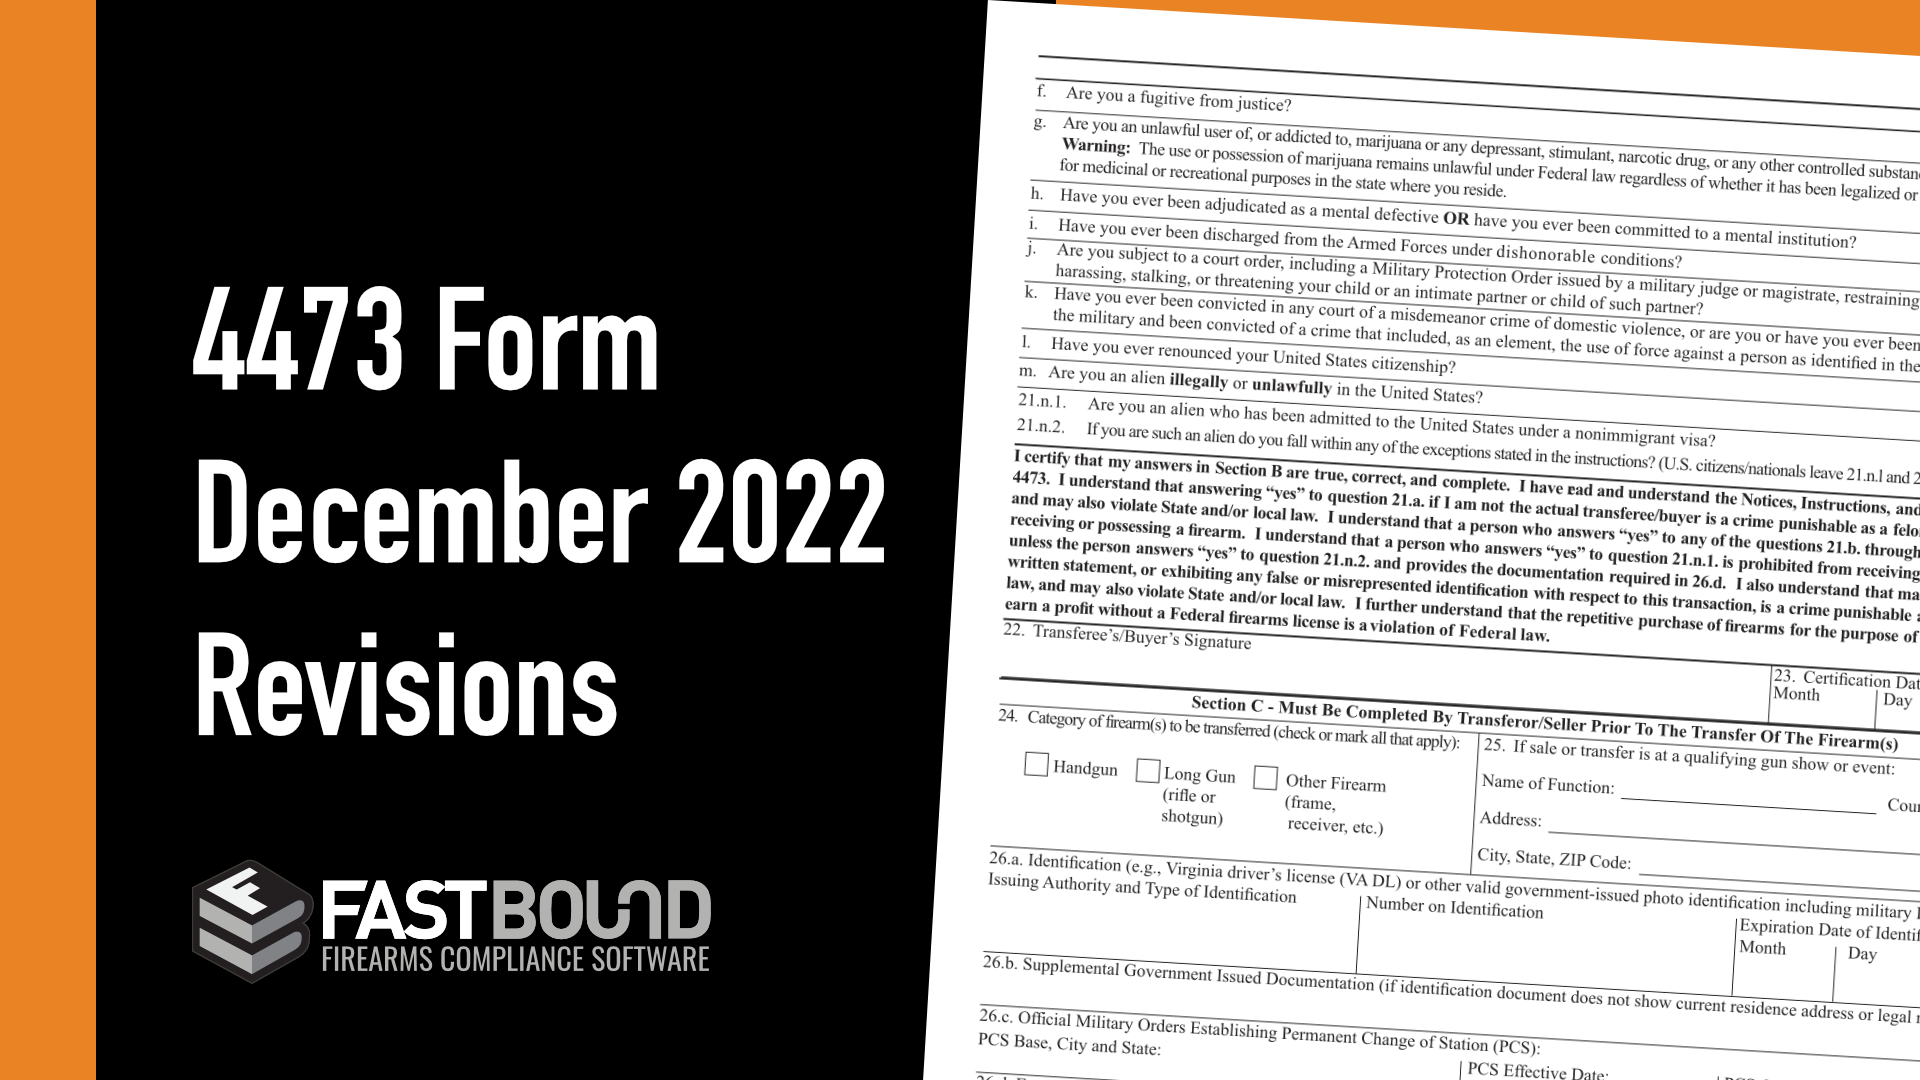 4473 Form December 2022 Revisions - Firearms Compliance Software - FastBound